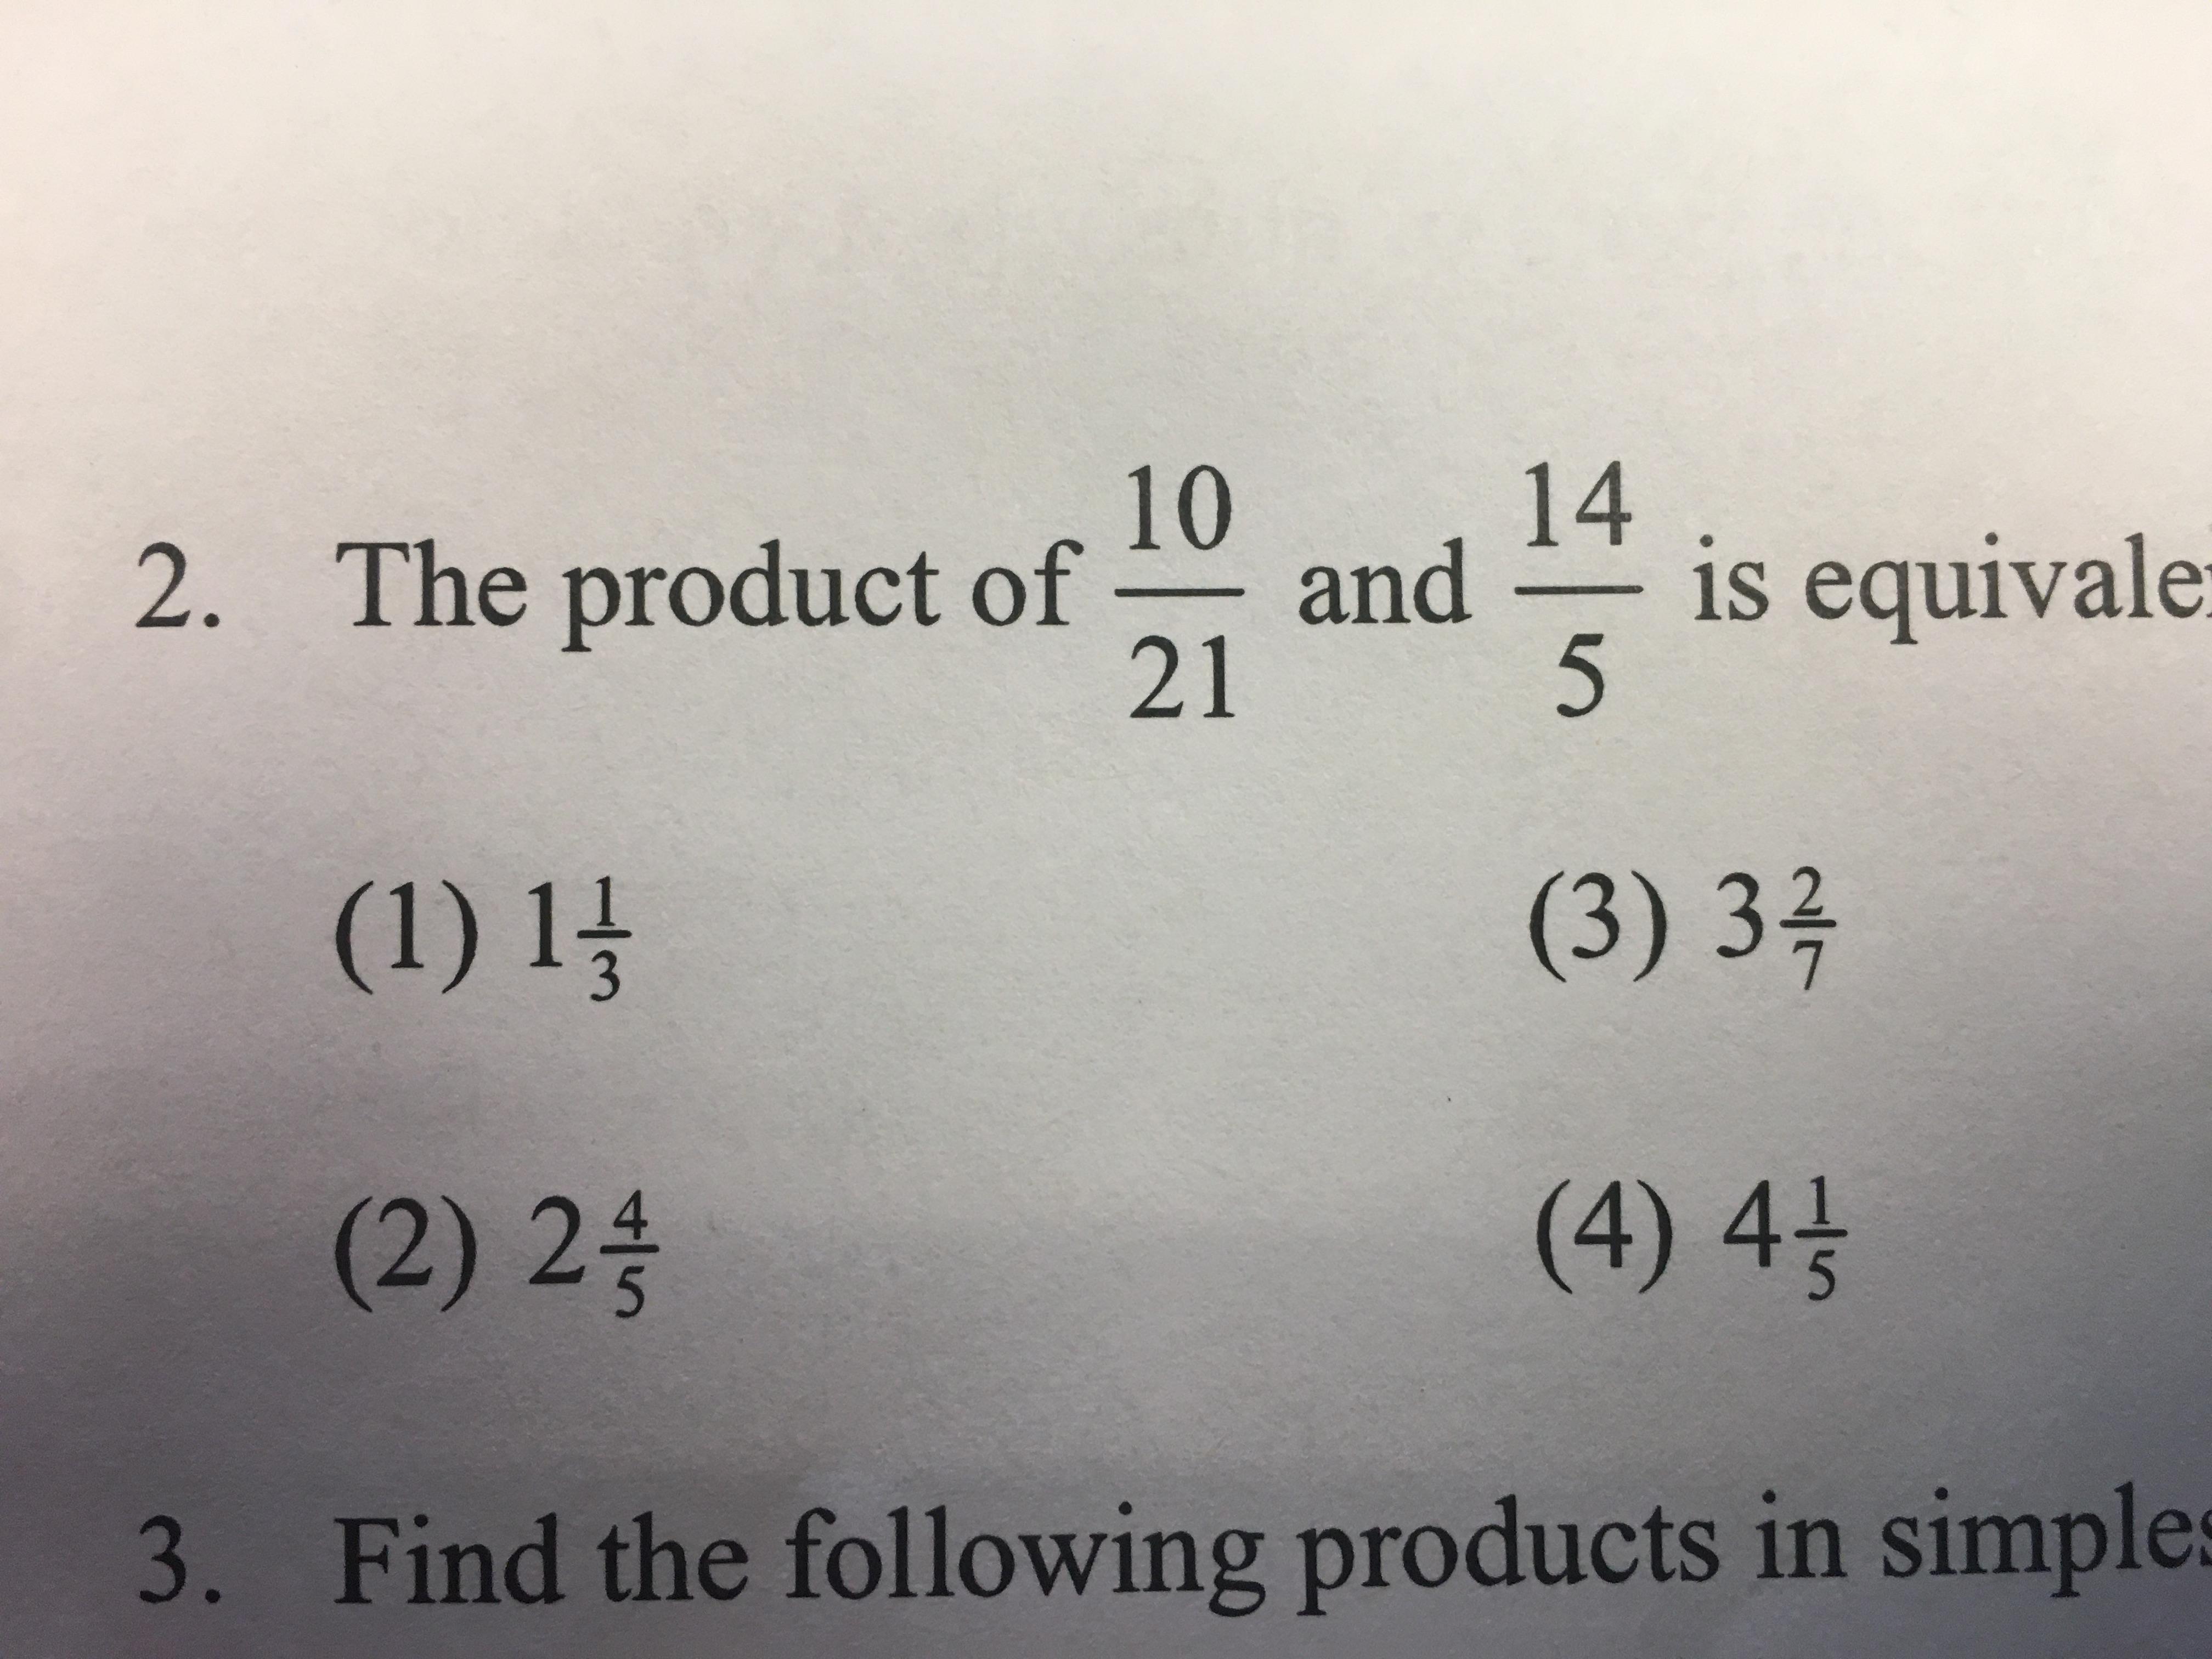 The Product Of 10 Over 22 And 14 Over 5 Is Equivalent To Which Of The Following 